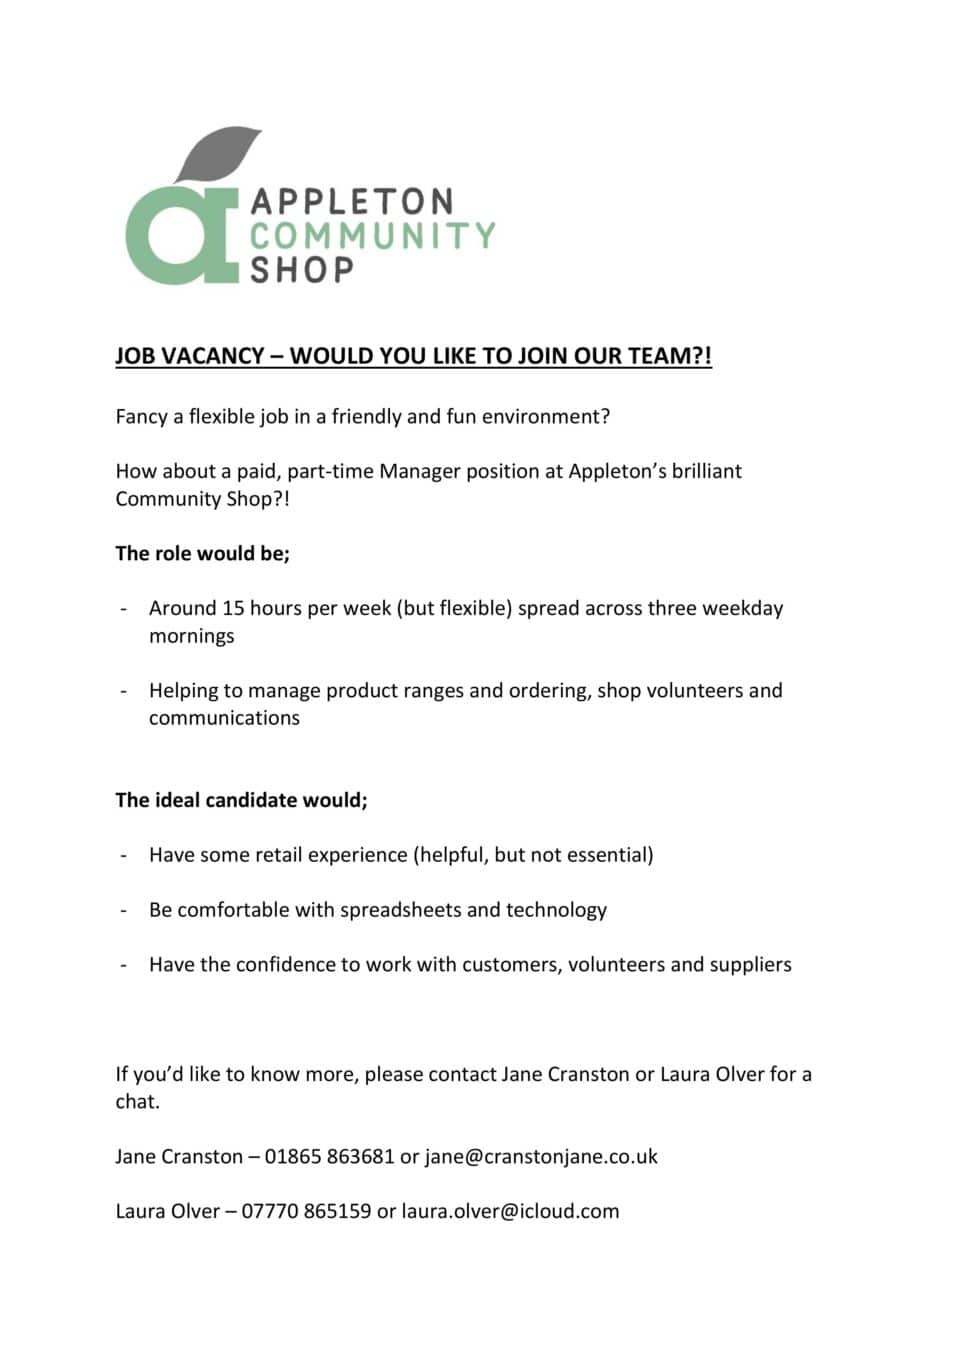 Appleton Community Shop - Vacancy for a Part-time Manager poster